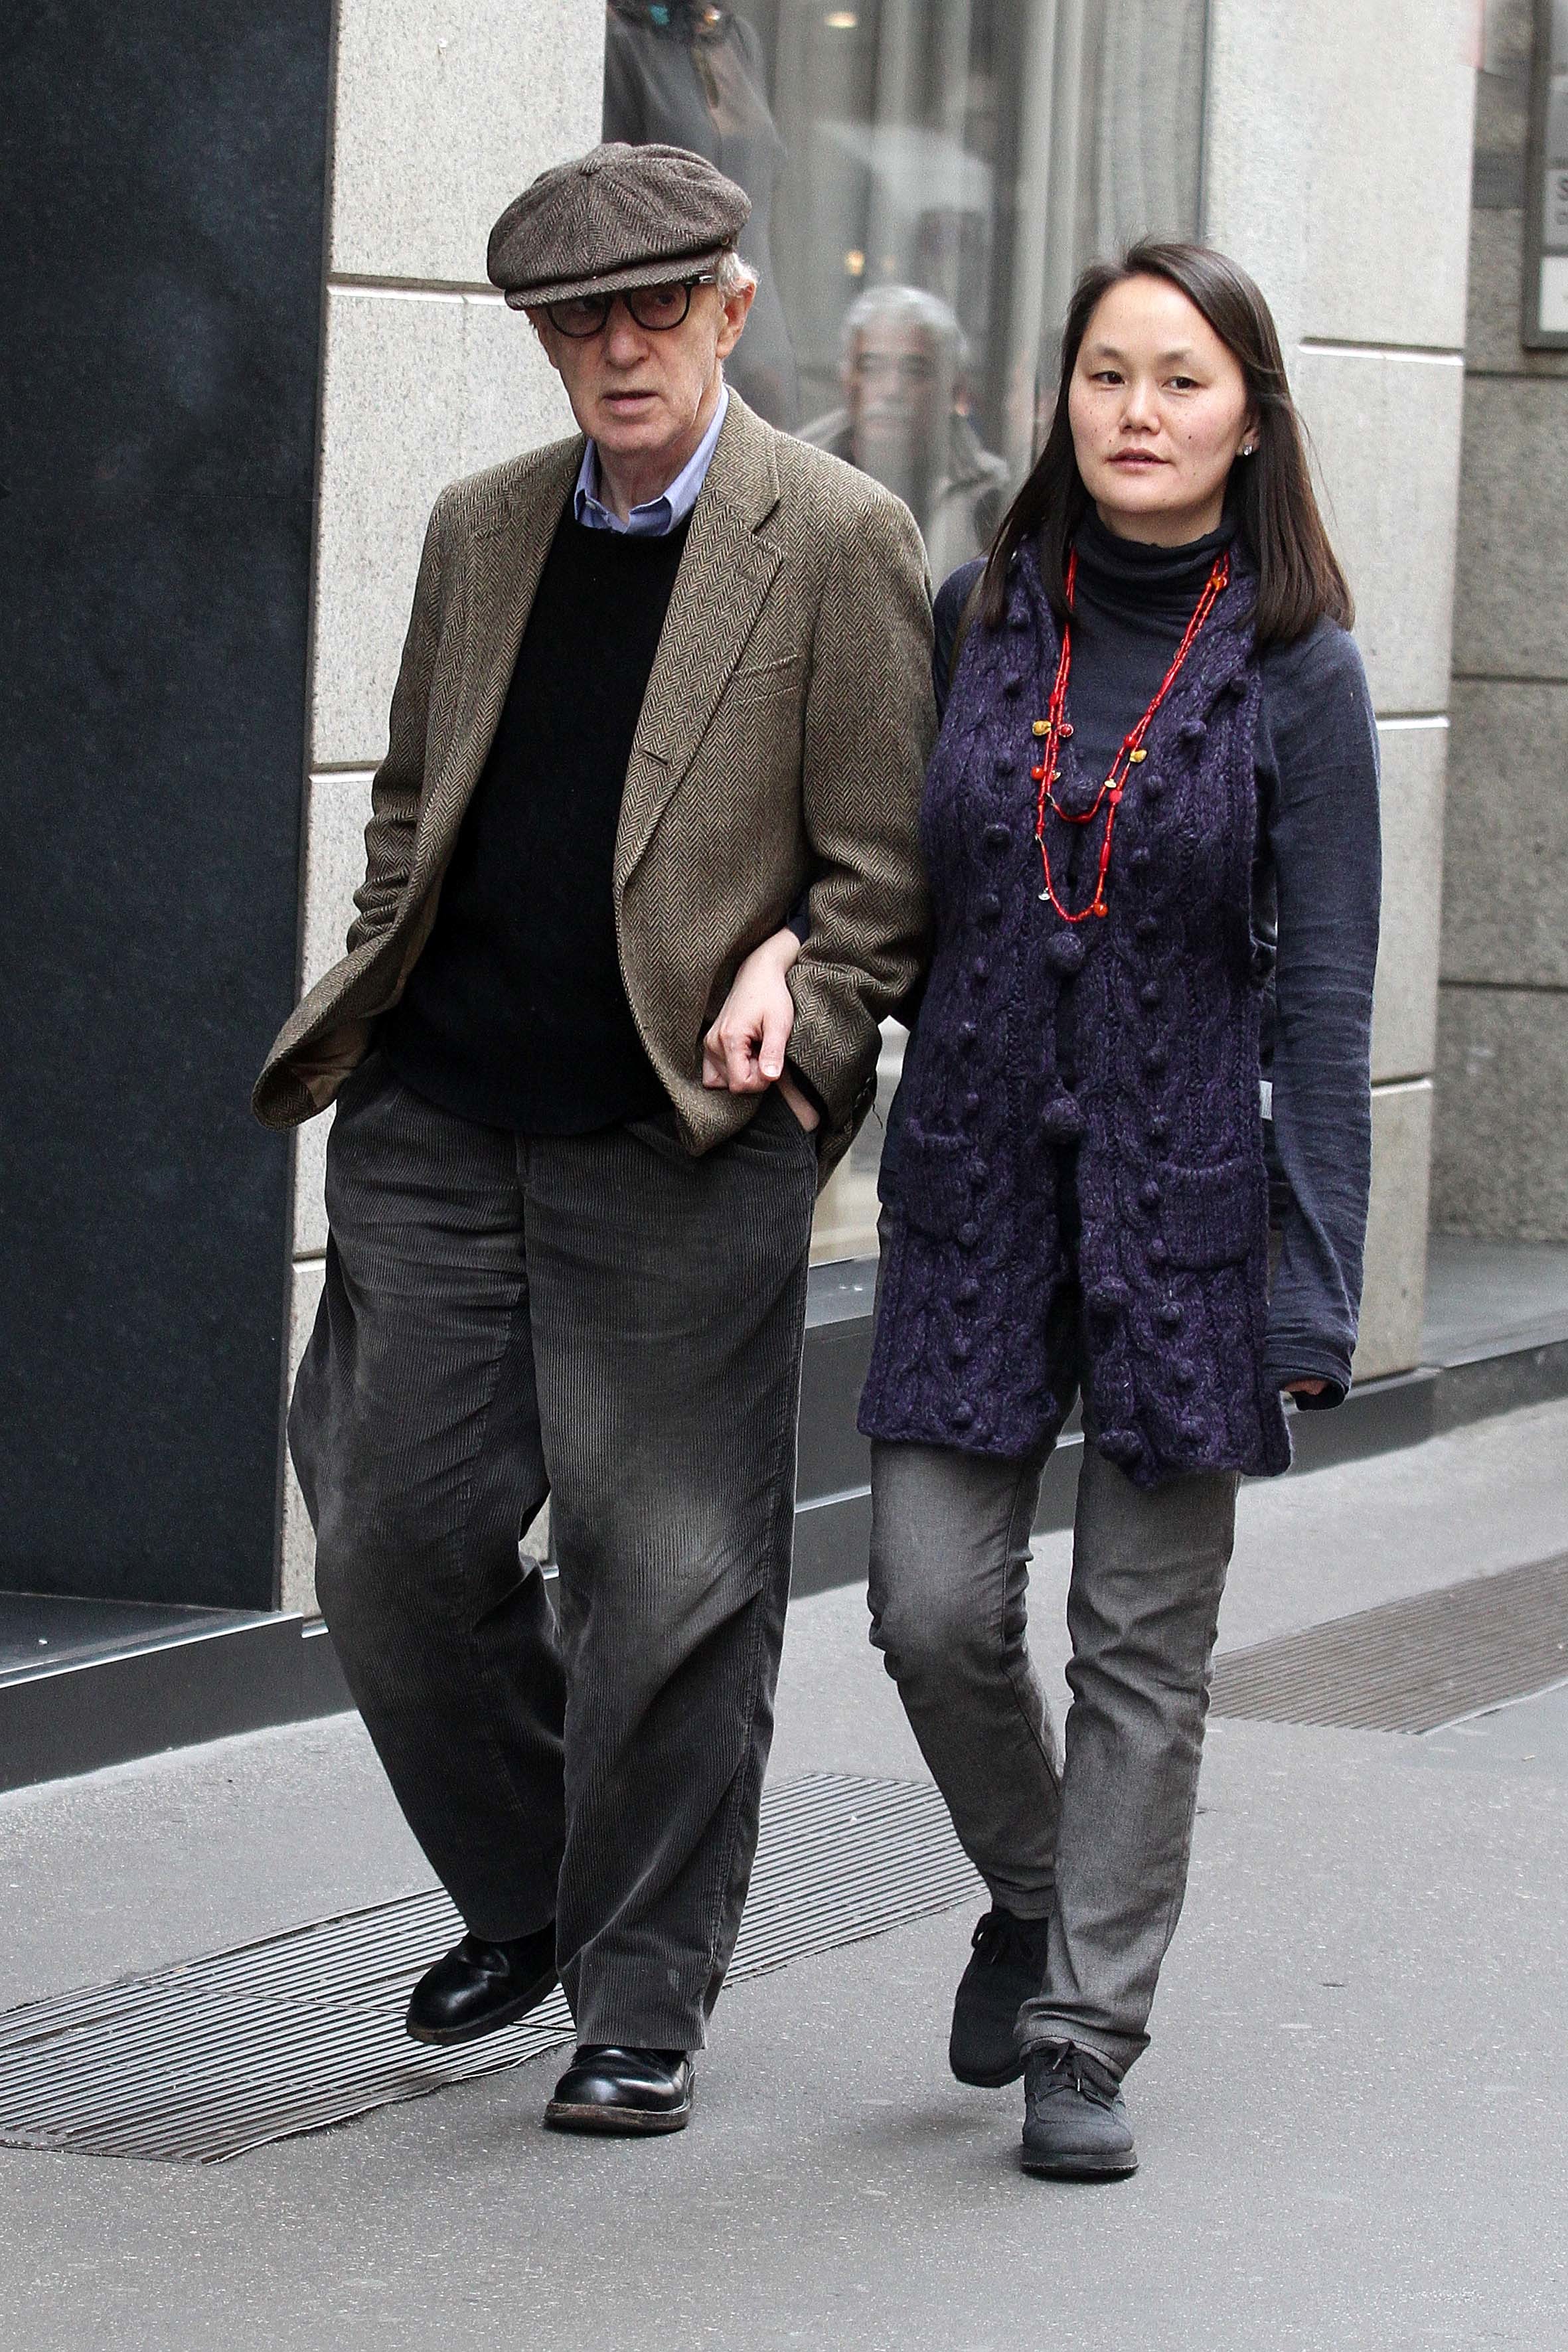 <p><a href="https://www.wonderwall.com/celebrity/profiles/overview/woody-allen-810.article">Woody Allen</a>'s affair with Soon-Yi Previn gained international attention in 1992 -- but not just because of his celebrity status or the 34-year age difference between him and his love. No, their hookup made headlines because Woody had been in a long-term relationship with Soon-Yi's adoptive mother, Mia Farrow. Woody married Soon-Yi in December 1997 and they now have two adopted daughters.</p>